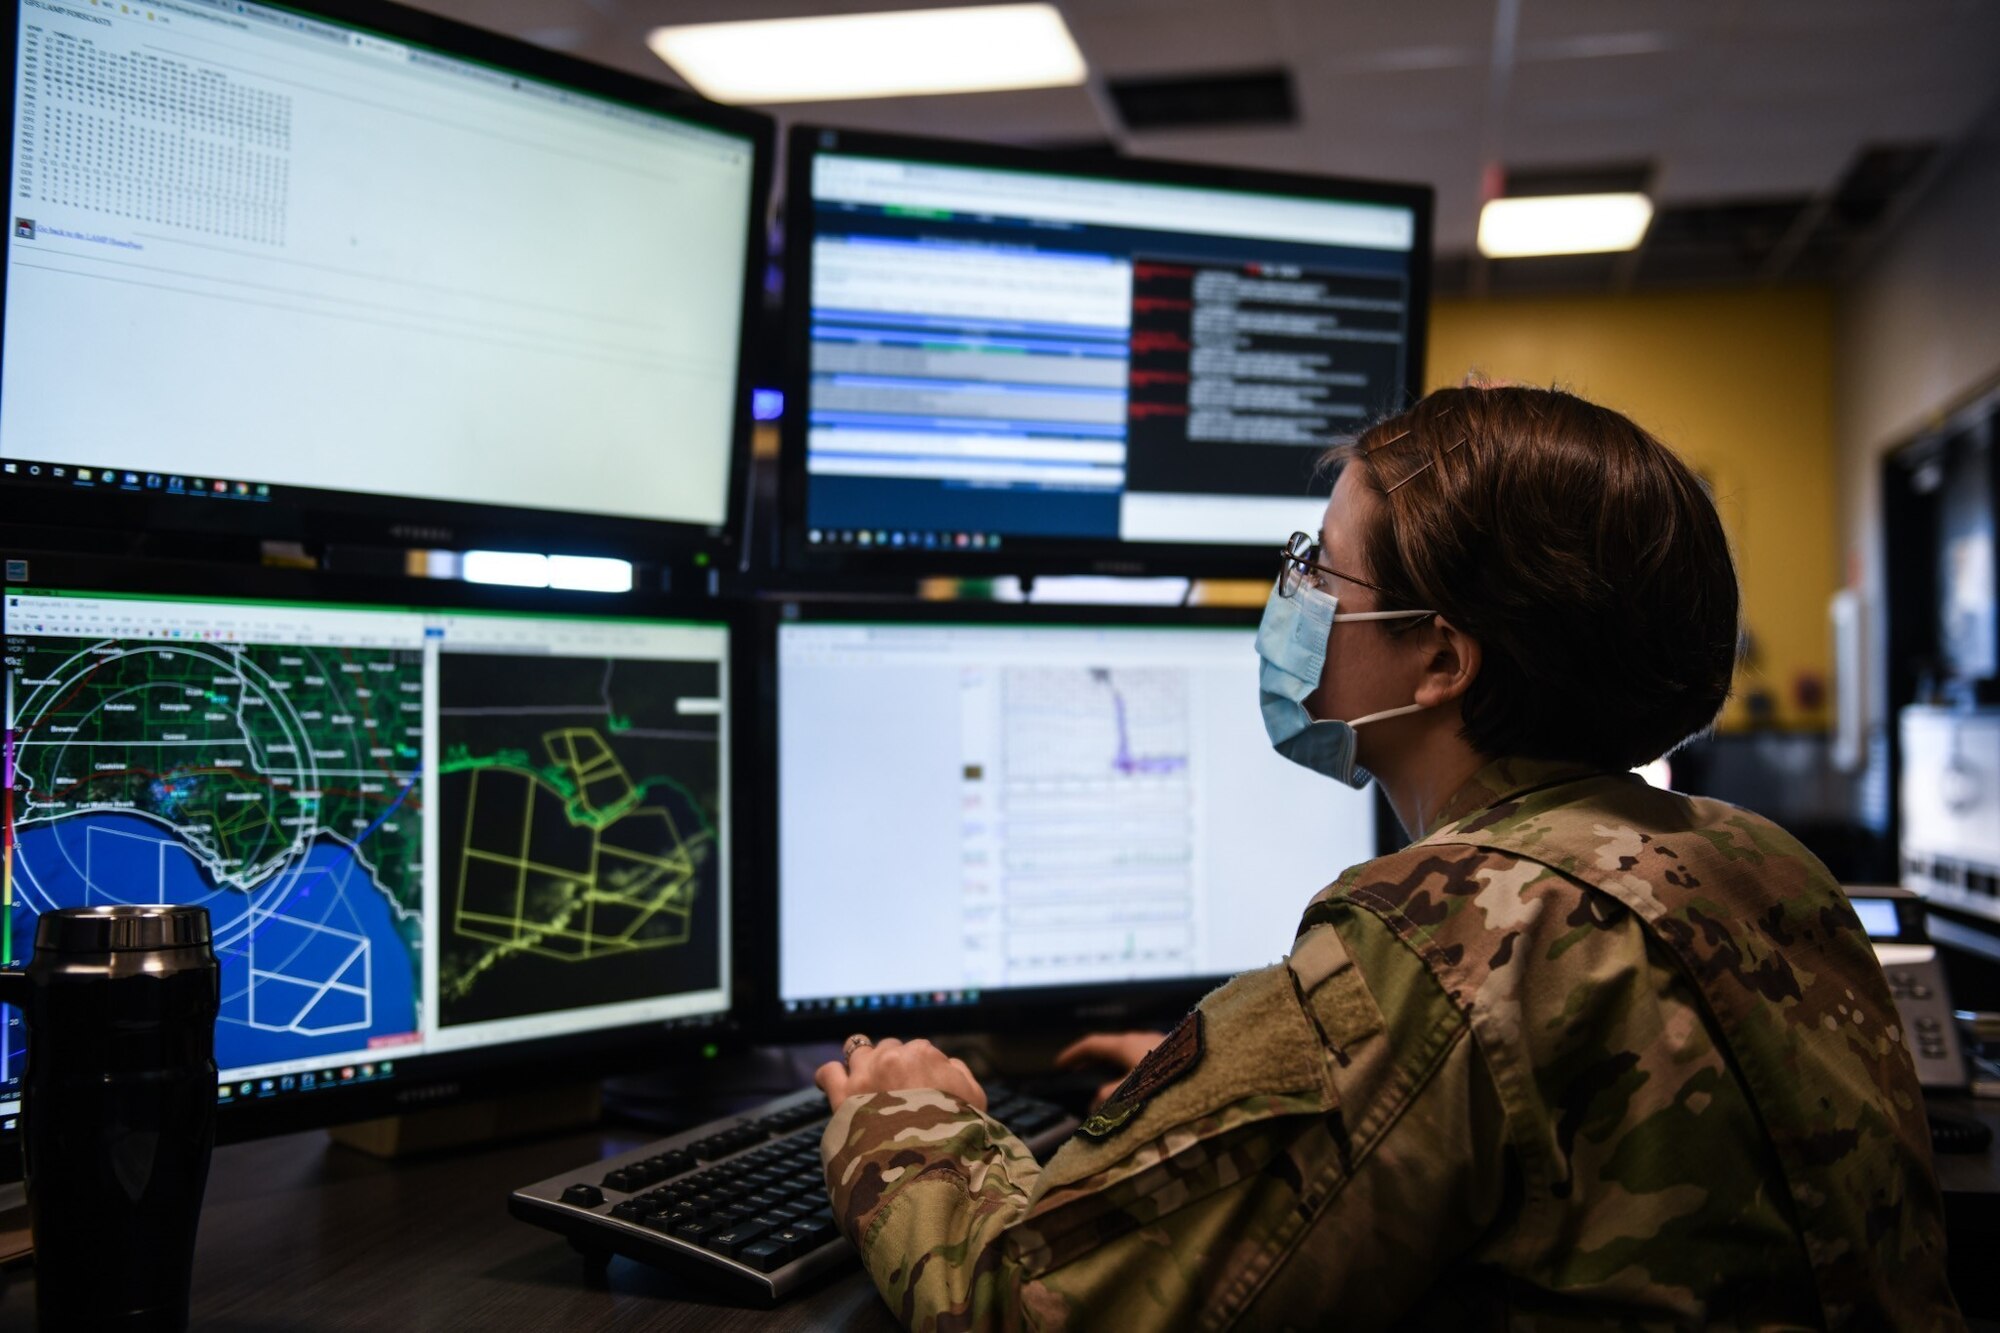 U.S. Air Force Airman 1st Class Amanda Landelius, 325th Operations Support Squadron weather journeyman analyzes information to input into a Terminal Aerodrome Forecast on Tyndall Air Force Base, Florida, Jan. 5, 2021. The TAF is a worksheet put together by the weather team to monitor and predict daily forecasts within the airspace. (U.S. Air Force photo by Airman 1st Class Tiffany Price)